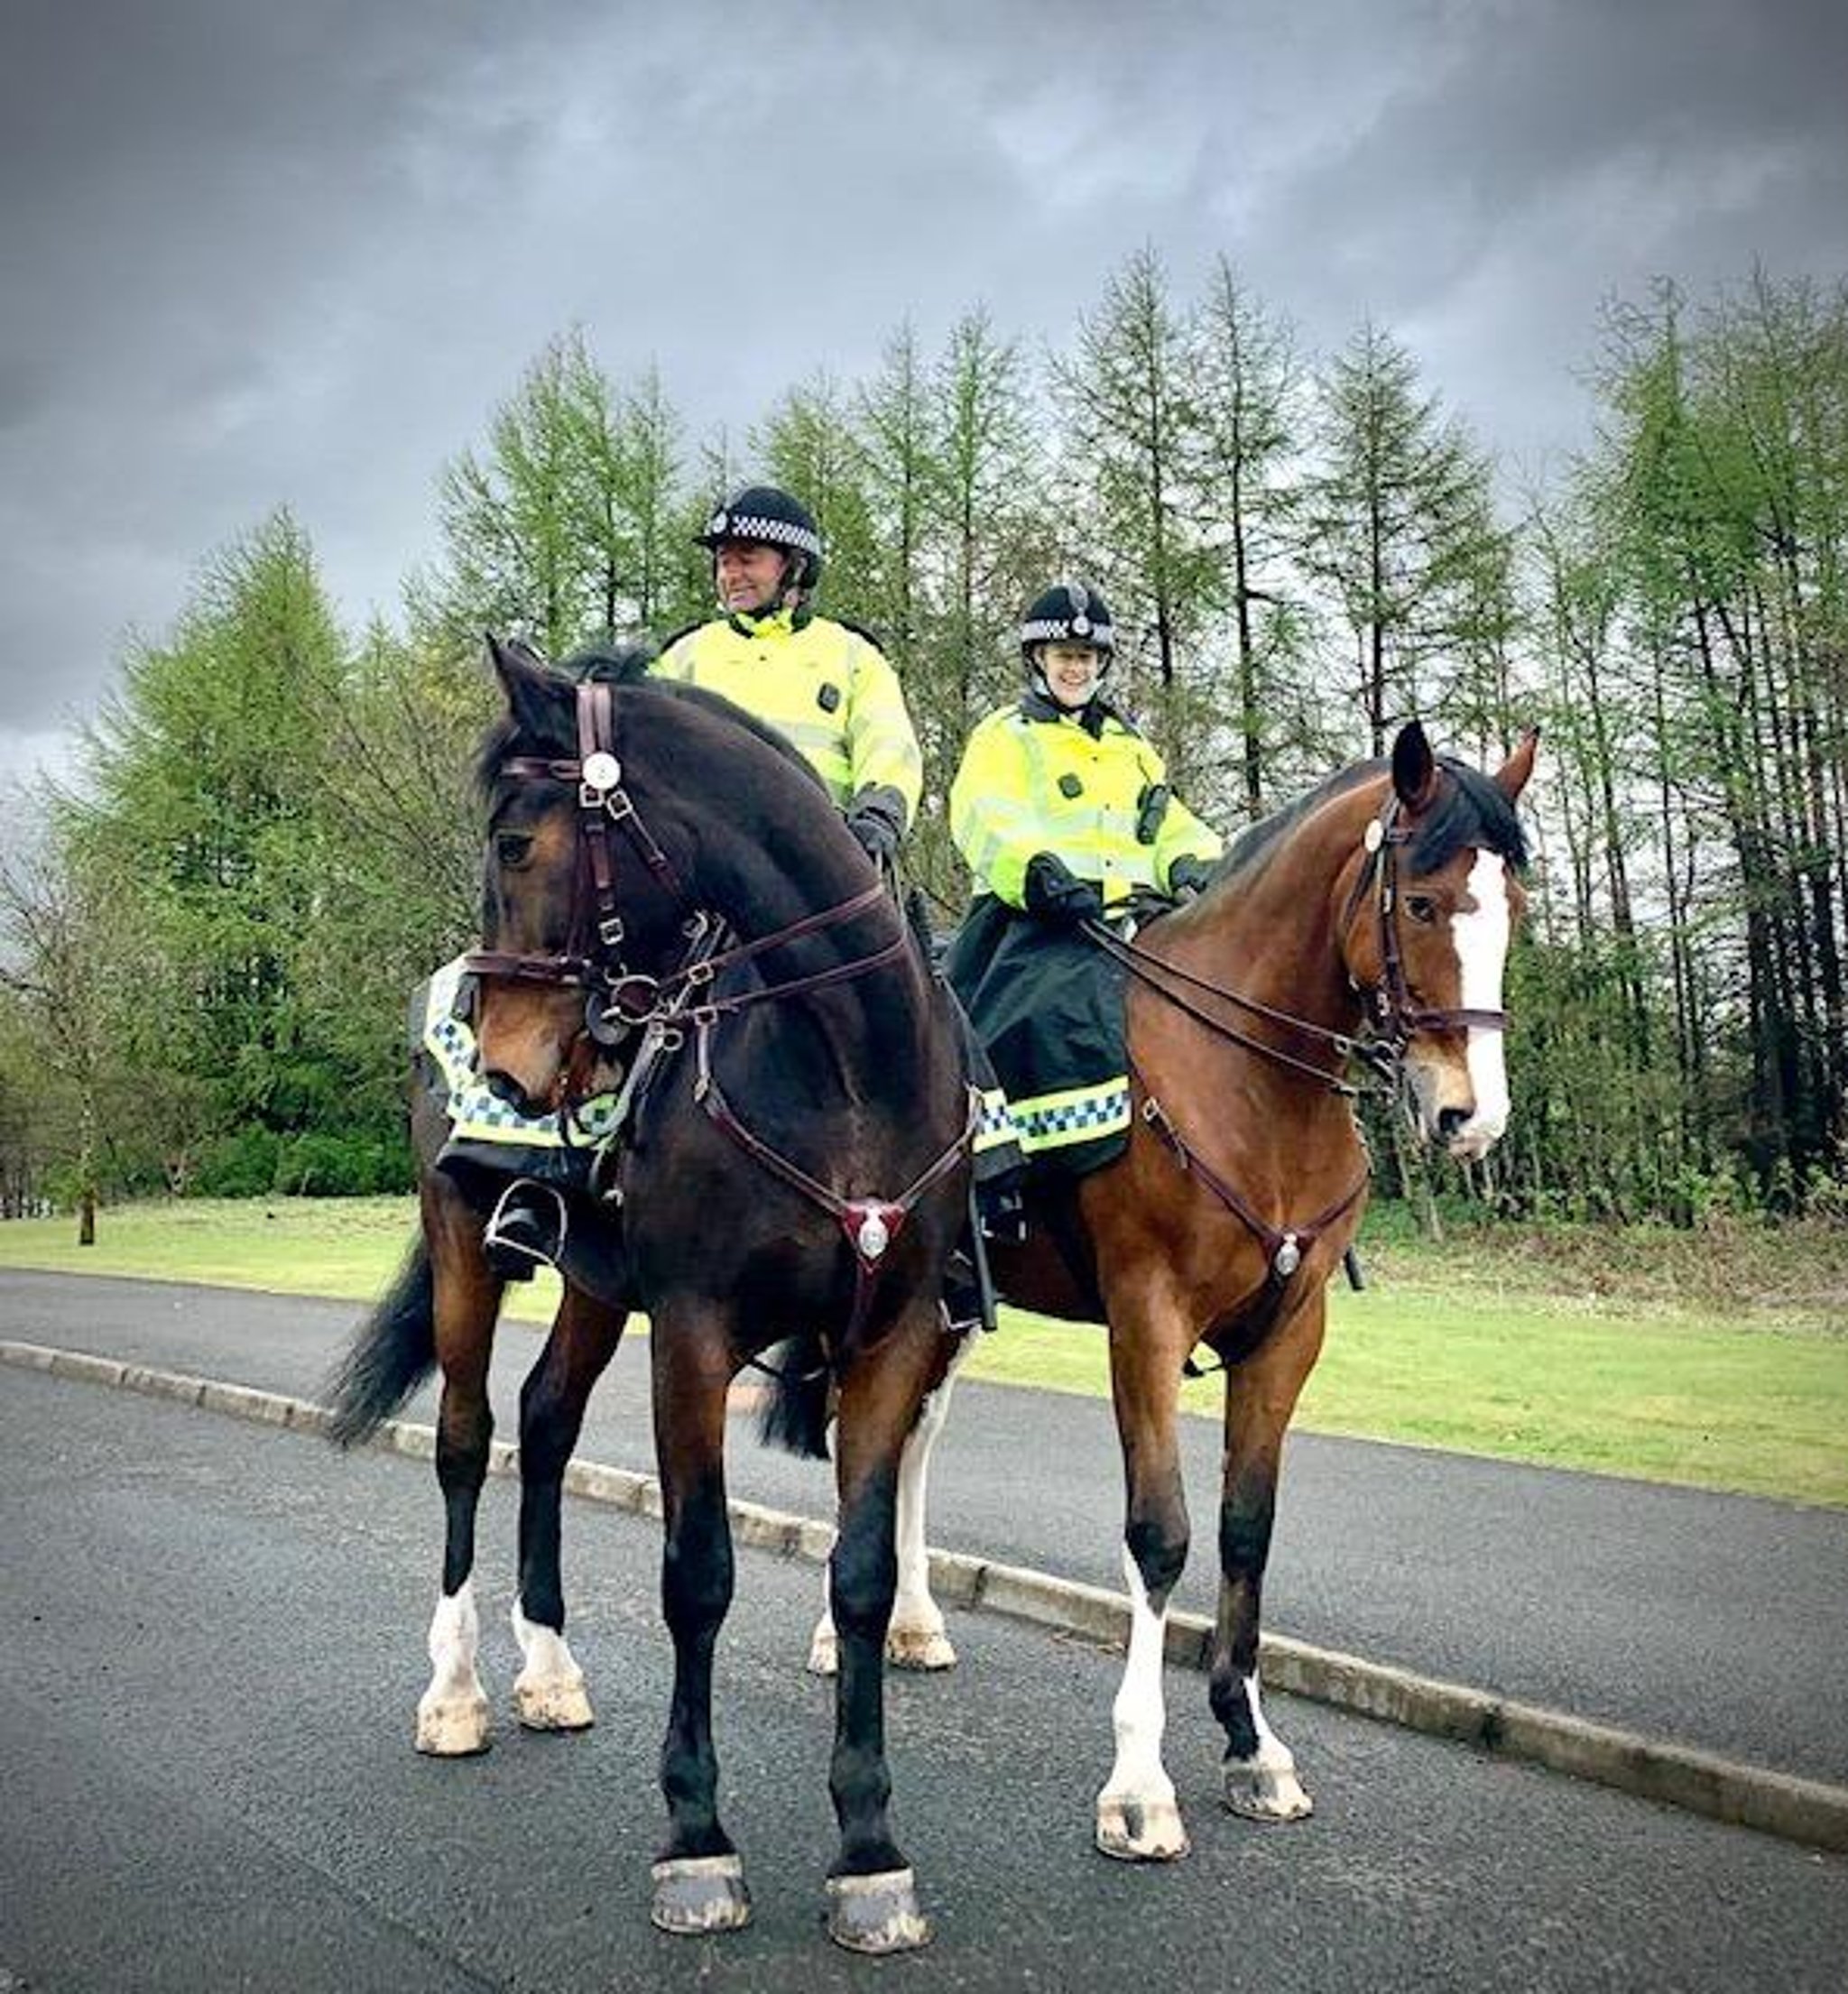 Bathgate parents urged to introduce kids to police horses with mounted section back ‘by popular demand’